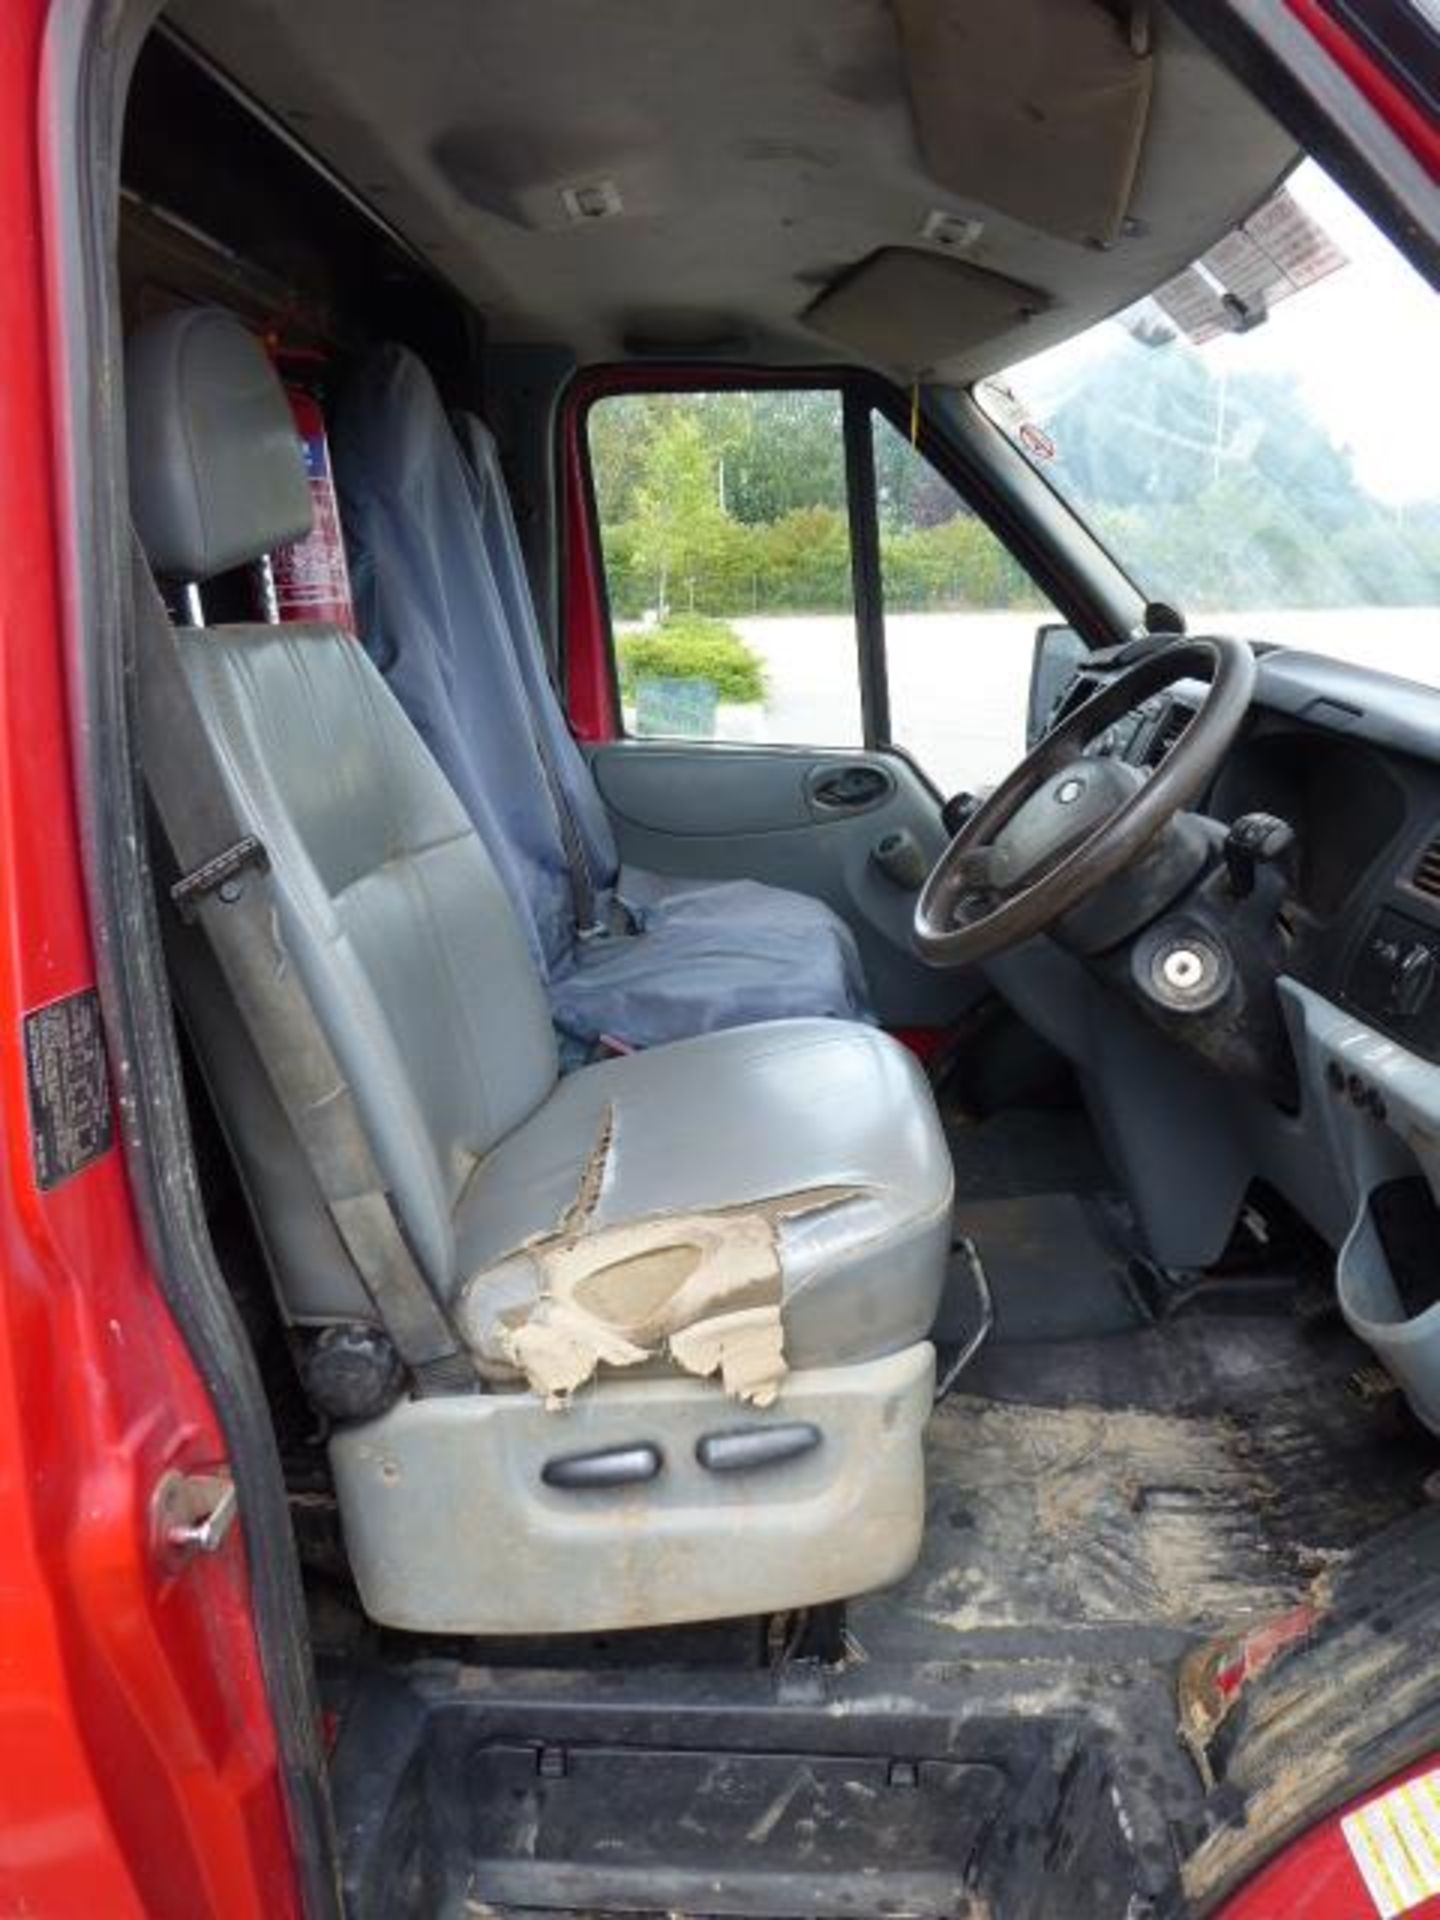 LO61 YWW (2011) Ford Transit 100 T350L D/C RWD, diesel in red/green MOT: 03/09/2020 - Image 6 of 10